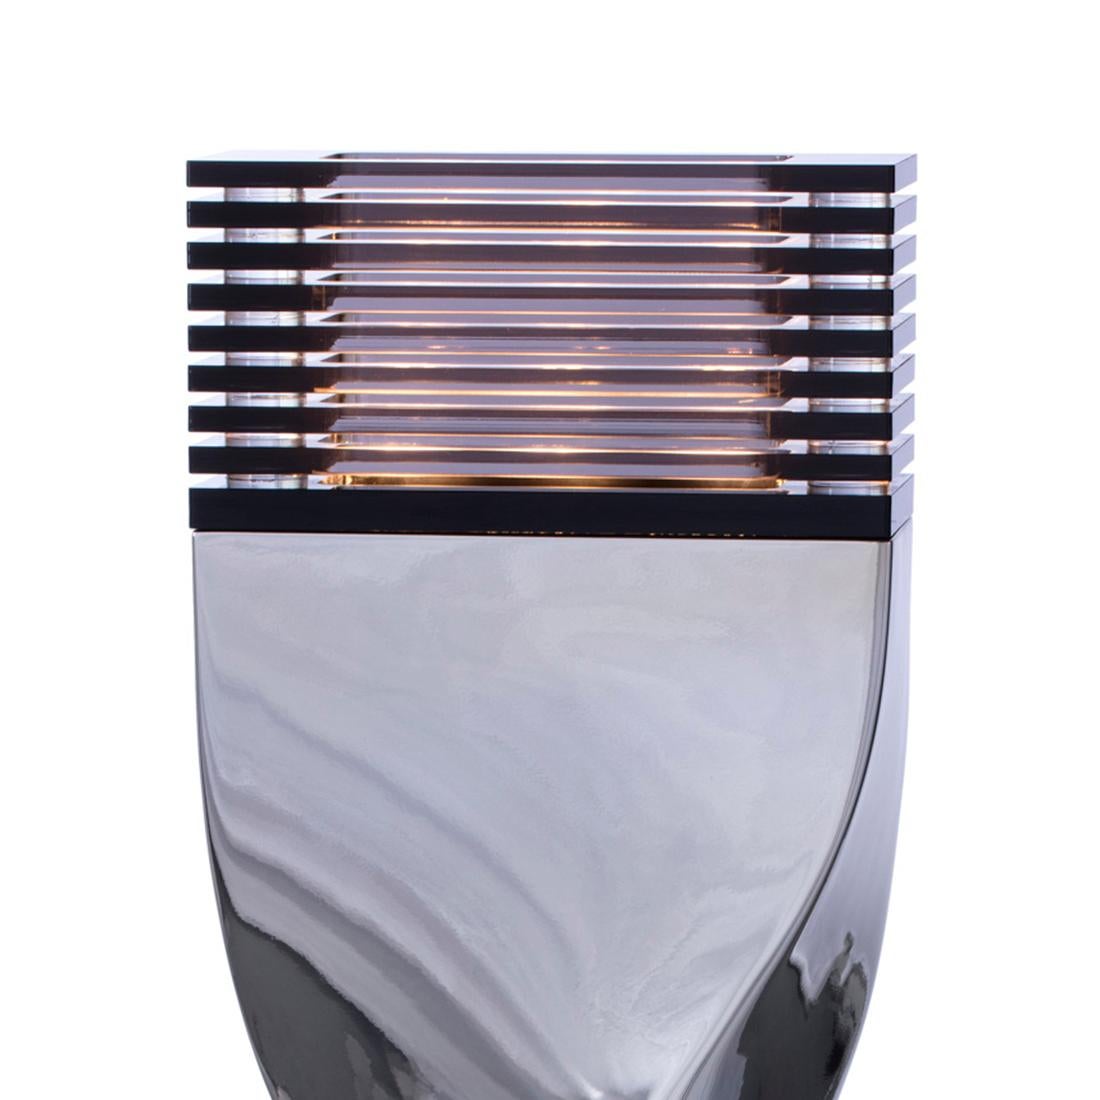 Table lamp bow tie Alu mirror XL with structure in casted aluminium
in crafted polished mirror finish. With altuglass lamp diffuser at the top.
3 Led bulbs, lamp holder type GU10 socket, with dimmer. Bulbs not
included. Weight: 7 kg. Available in